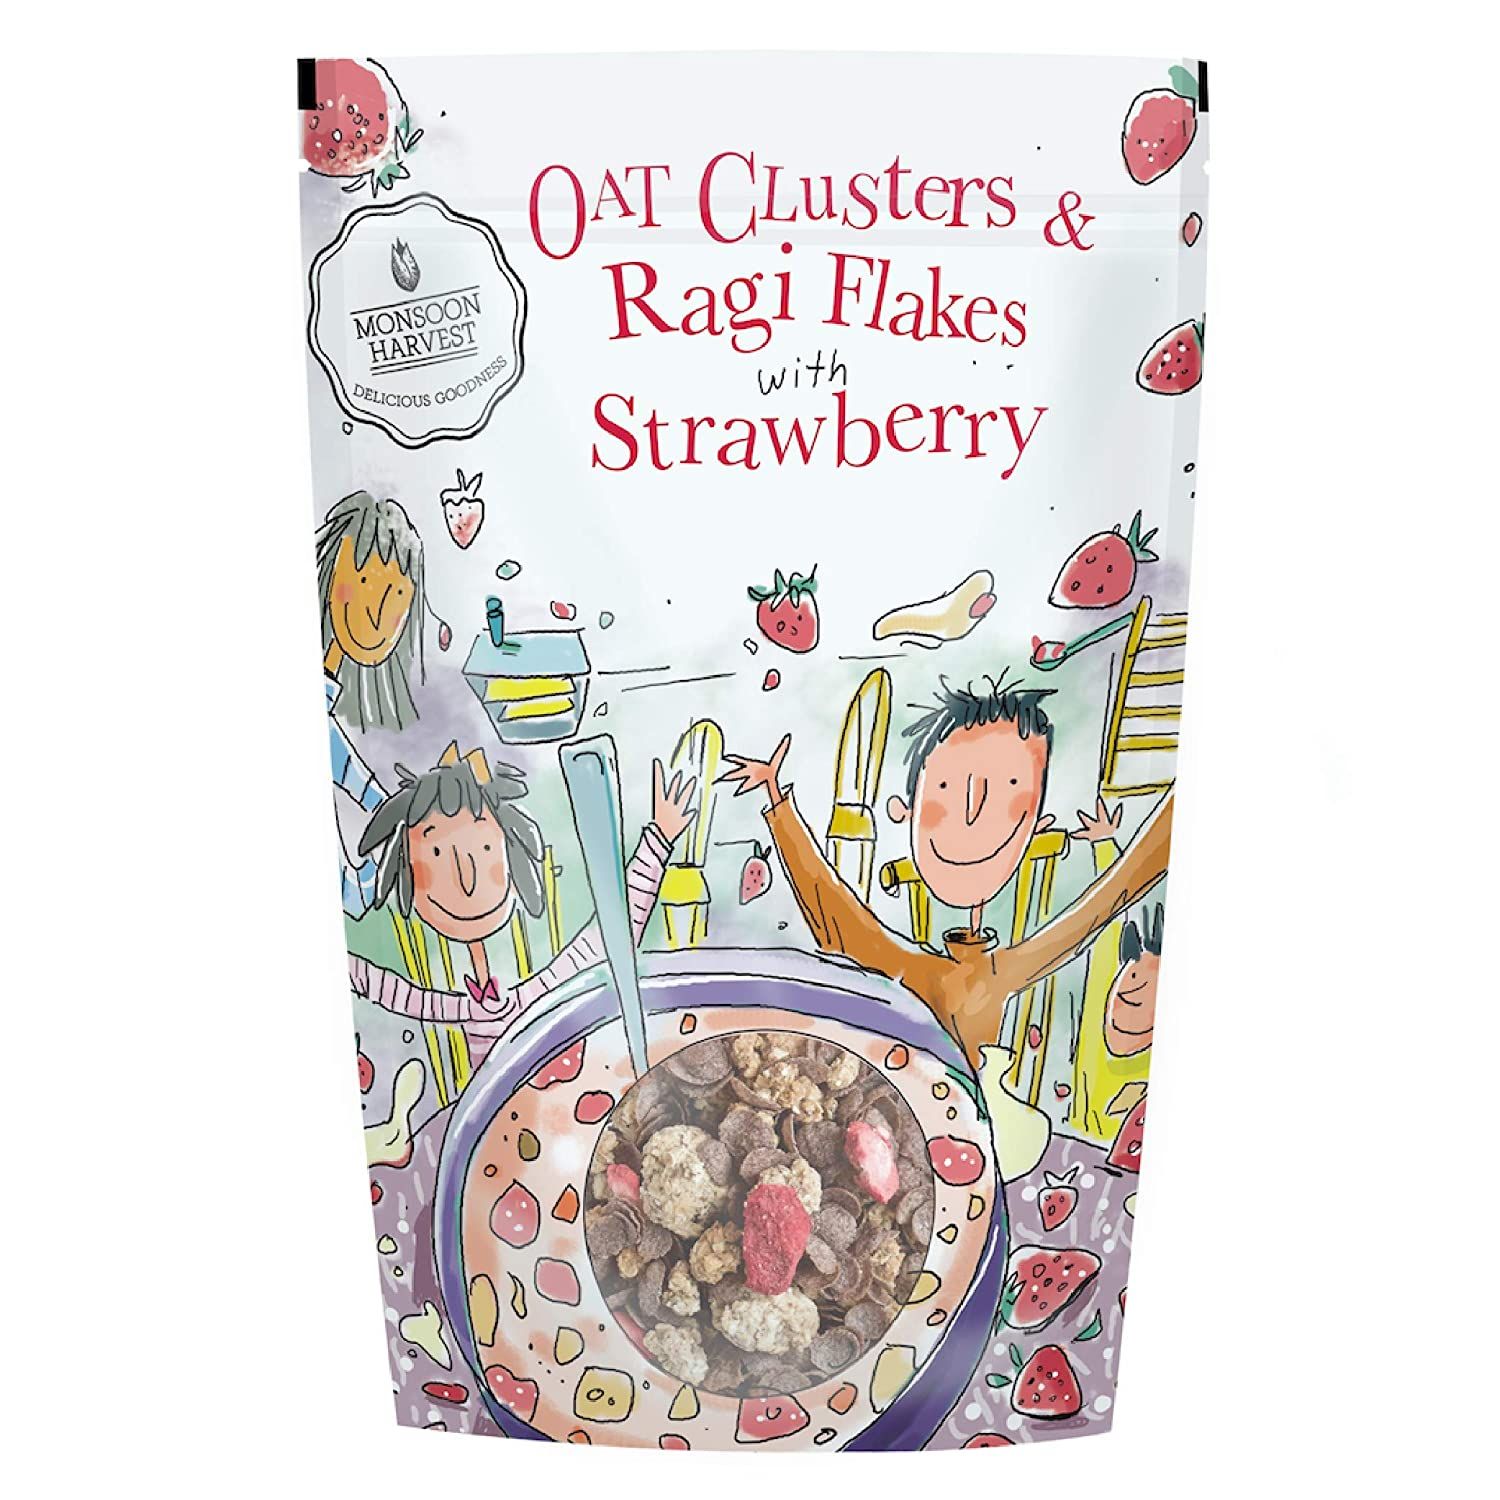 Monsoon Harvest Breakfast Cereal - Oat Clusters & Ragi Flakes With Strawberry Image